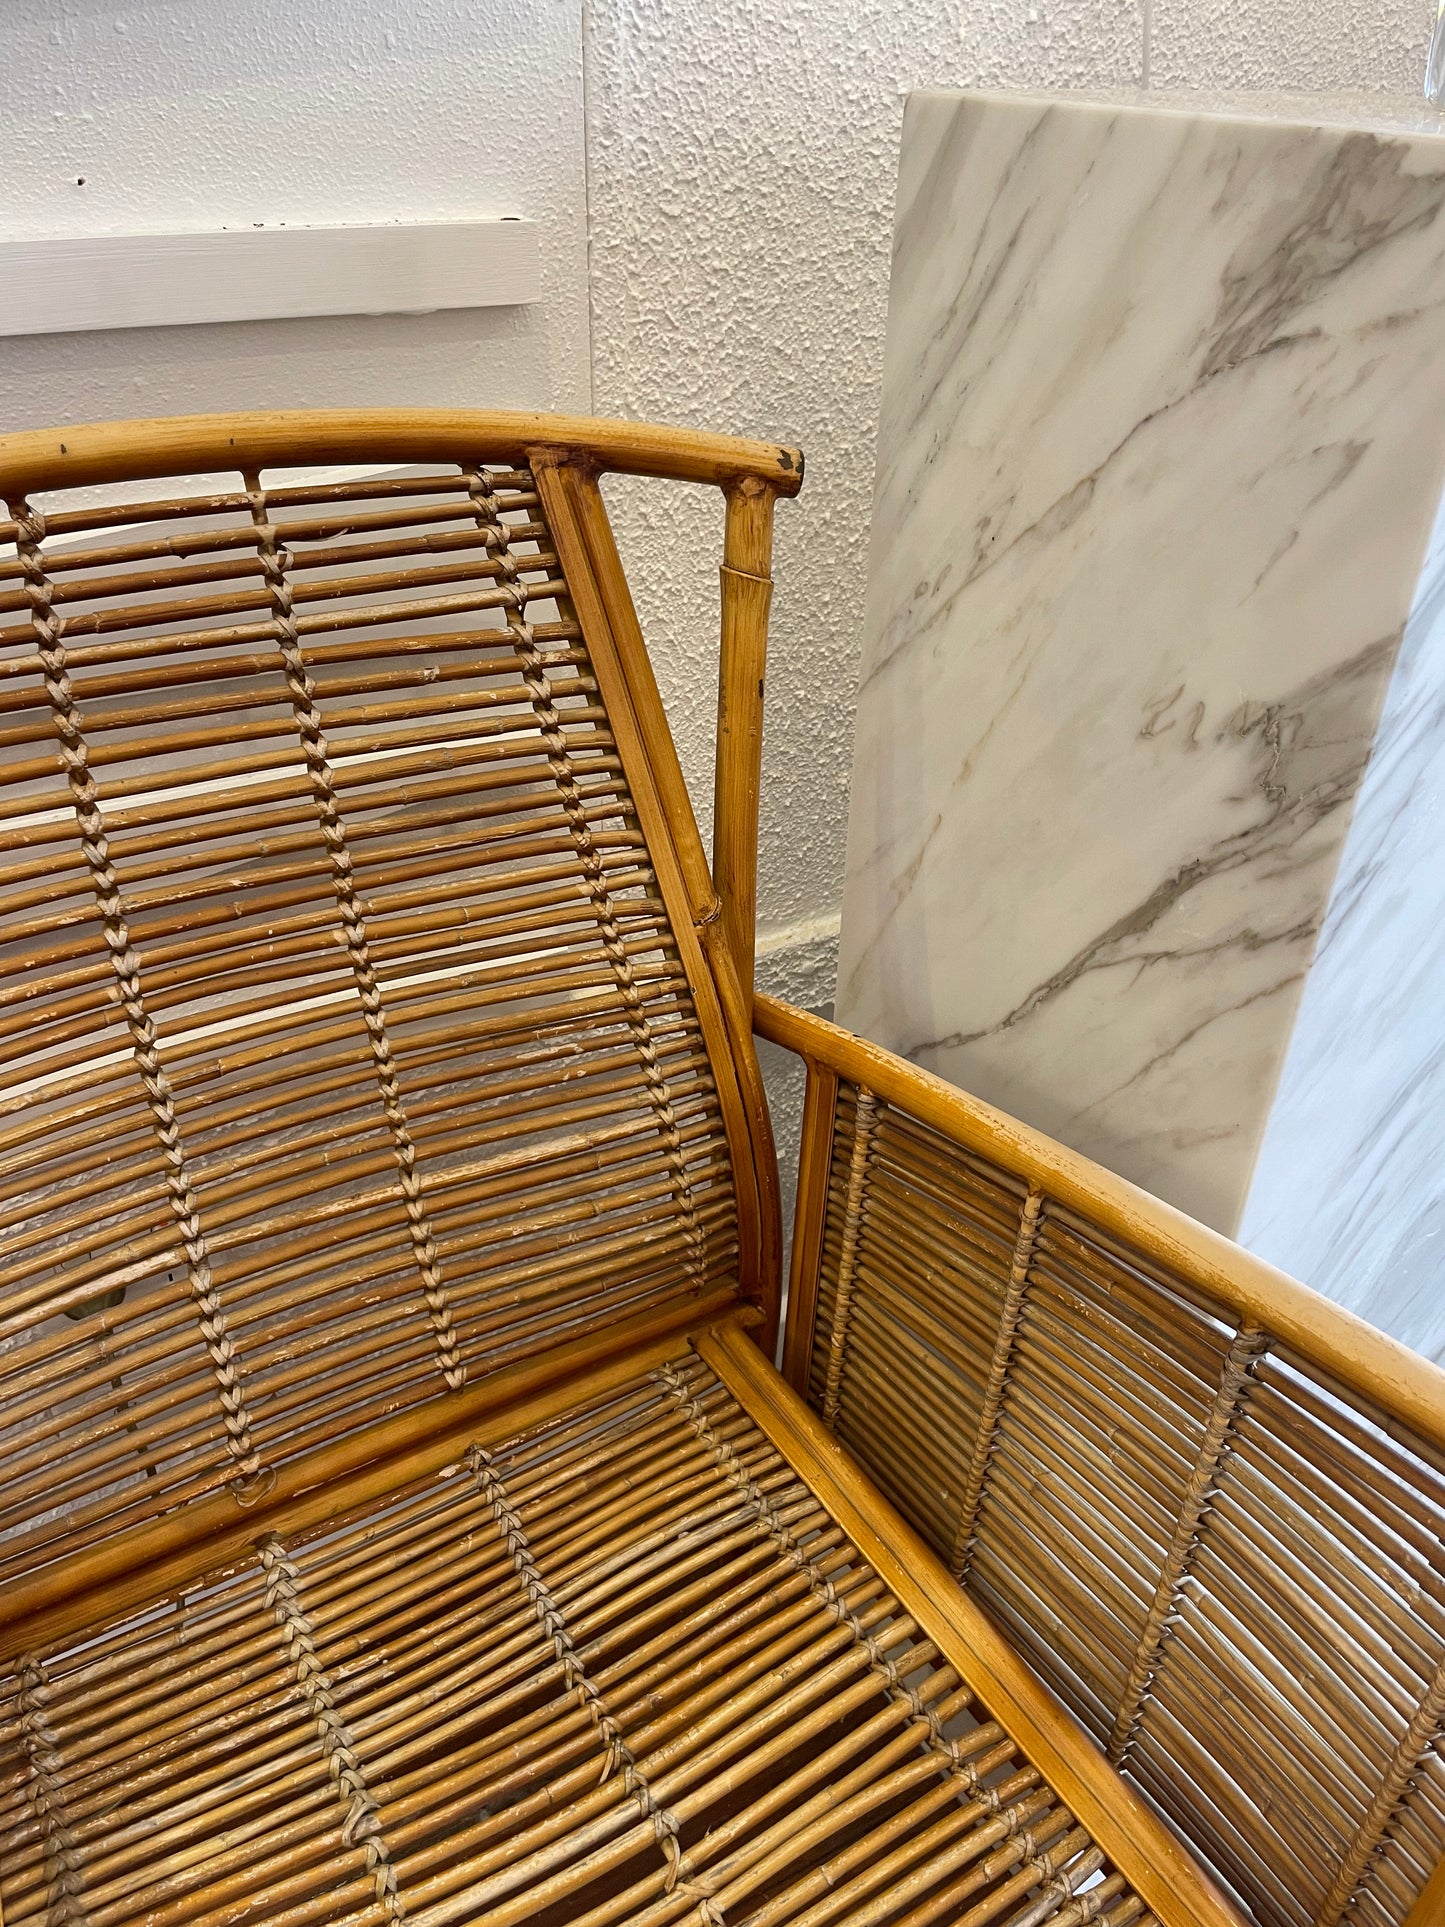 Mid Century French Bamboo Chair